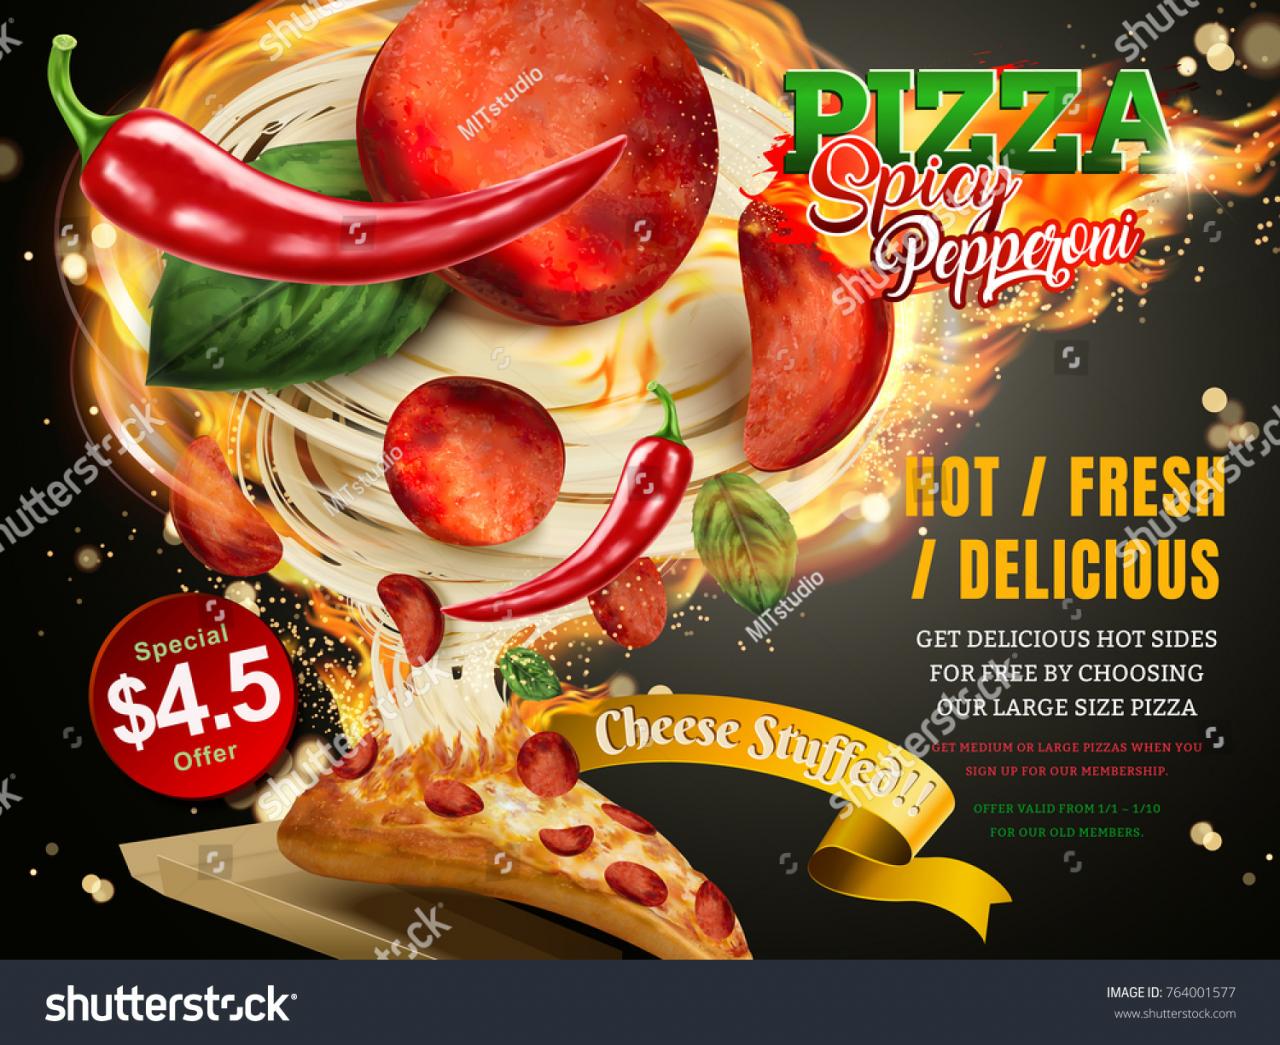 Pepperoni pizza with stringy cheese and delicious toppings flying out with fire and chili, 3d illustration